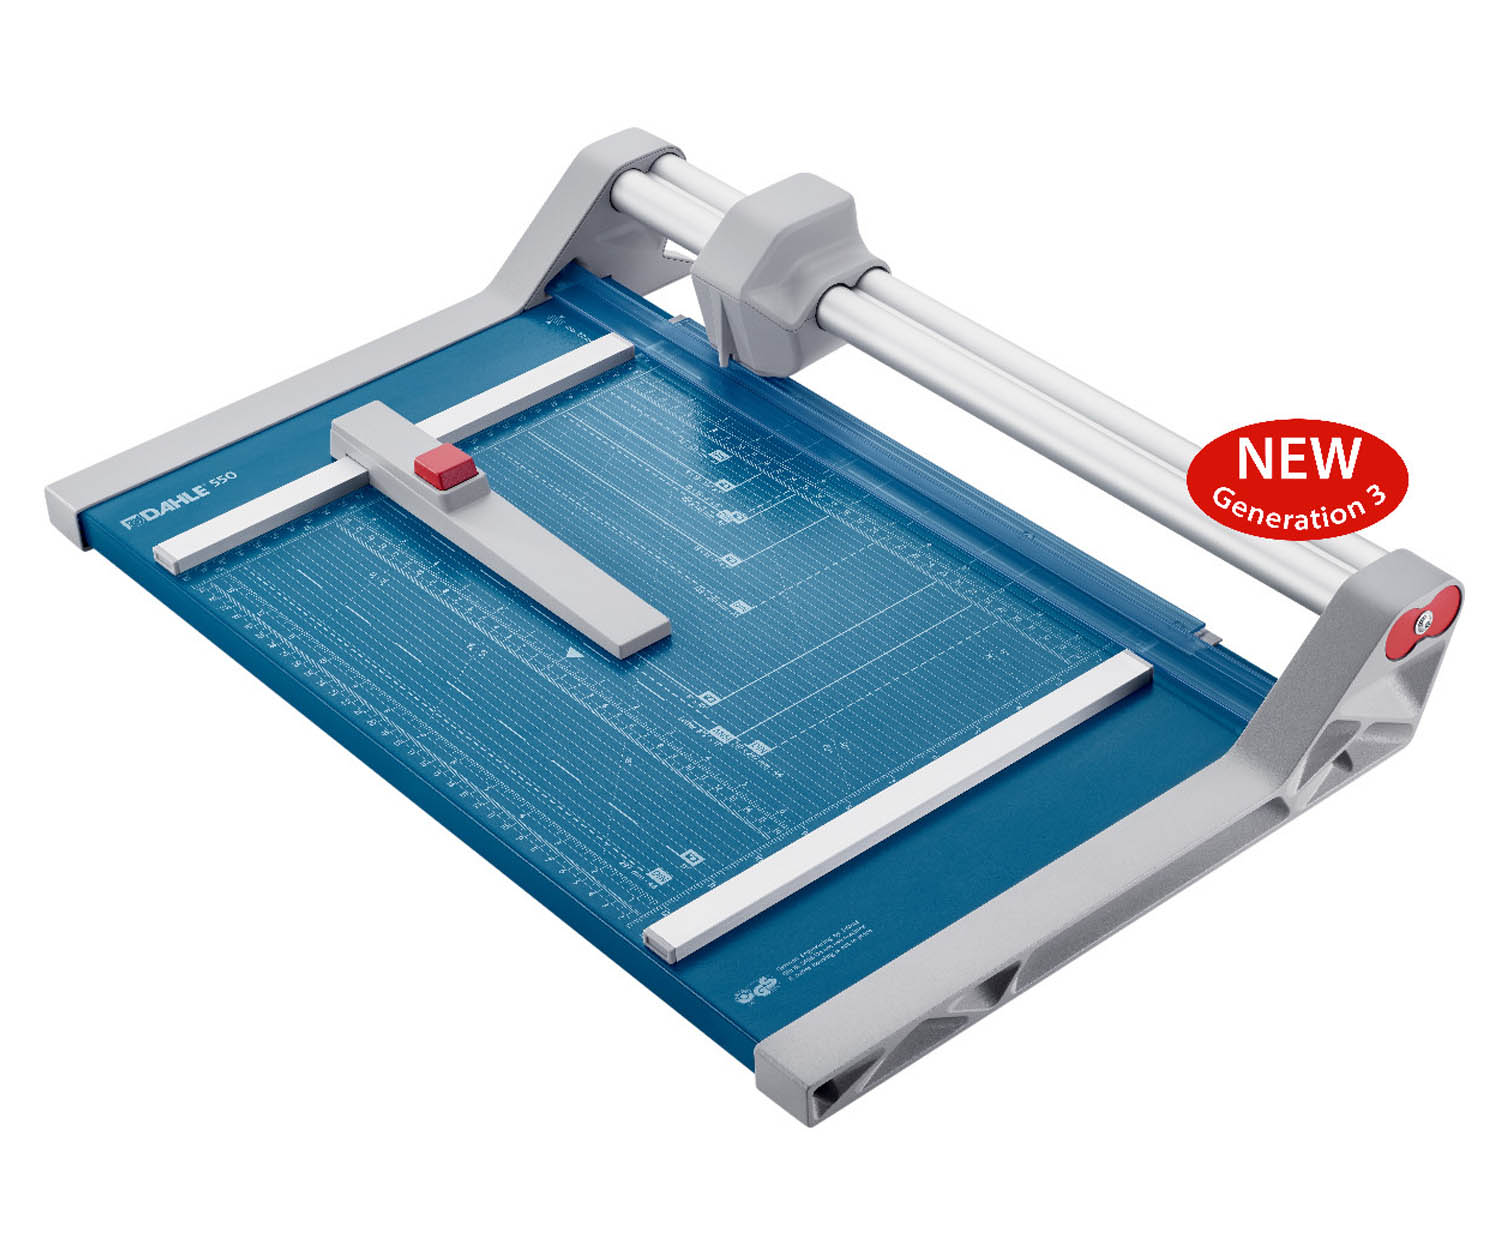 Dahle 550 Rotary Paper Trimmer